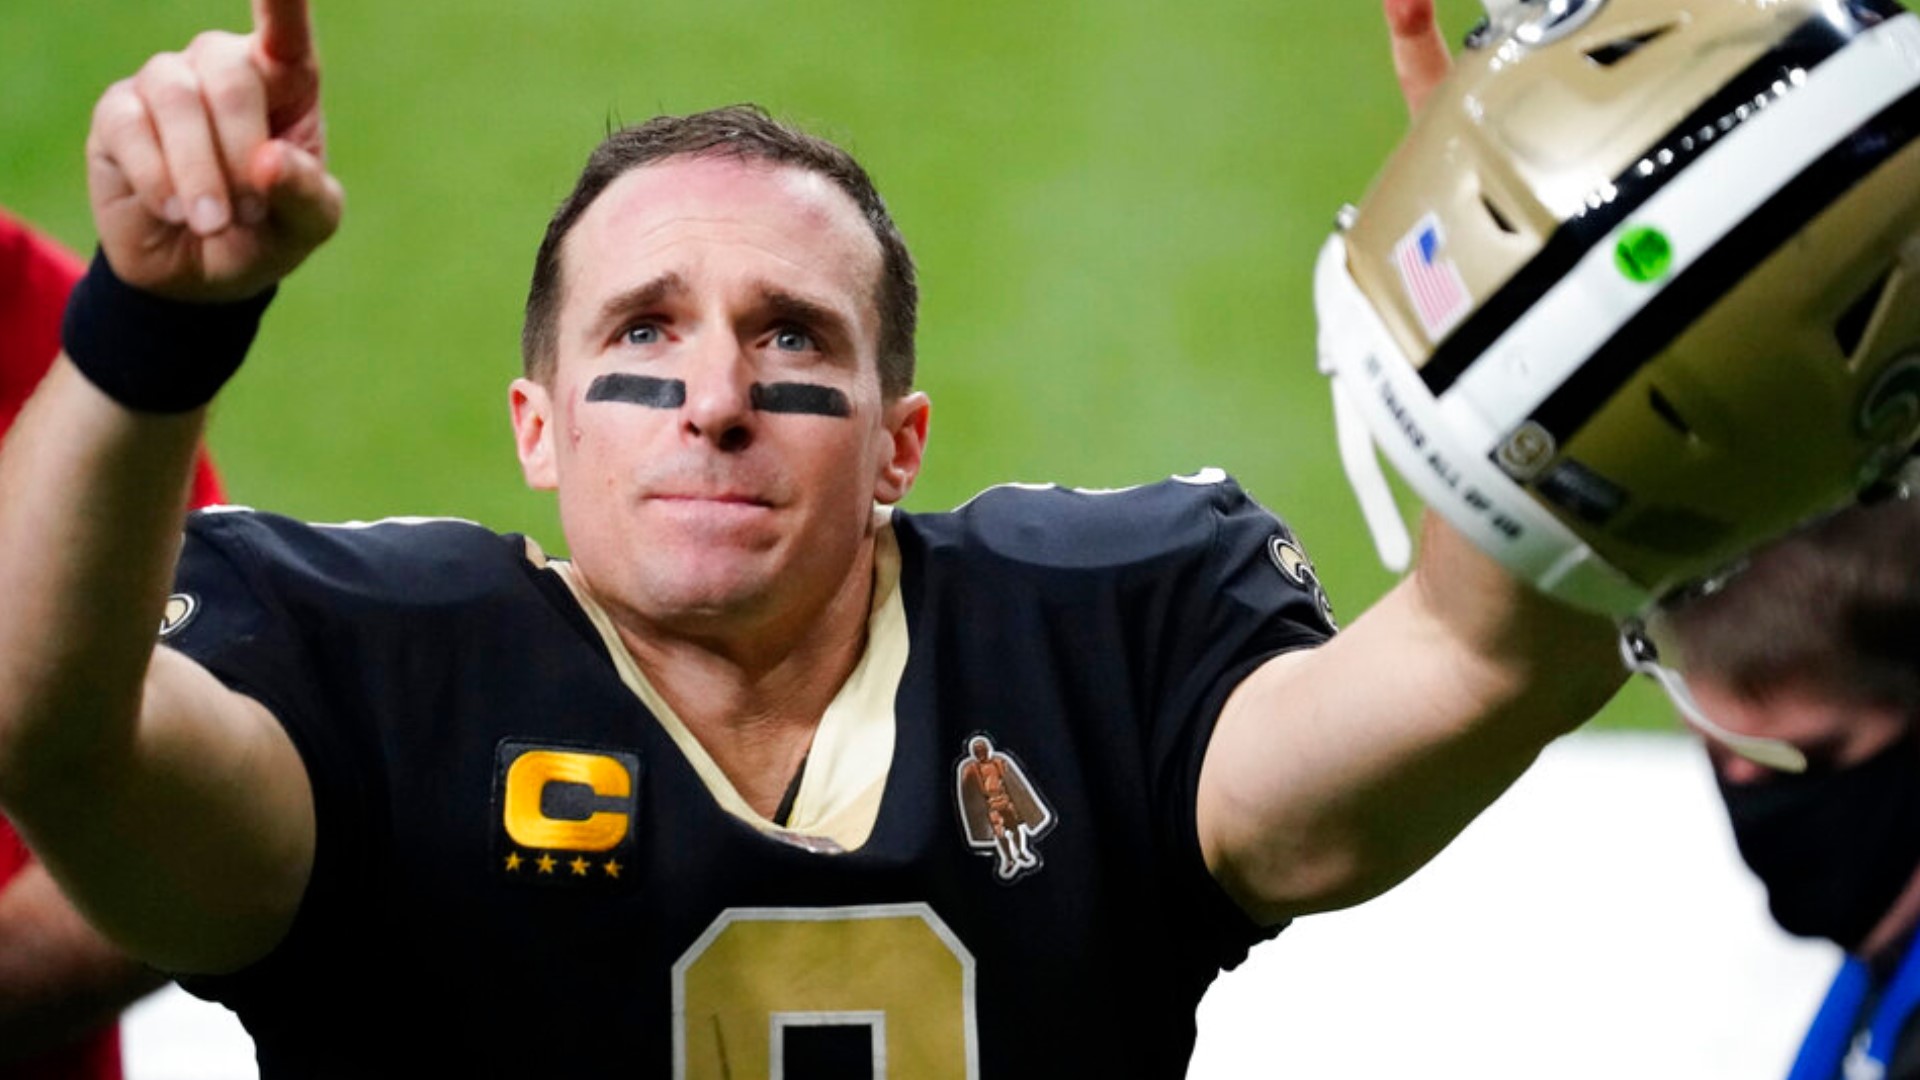 Drew Brees Makes His NBC Debut: Internet Amazed by His New Hair